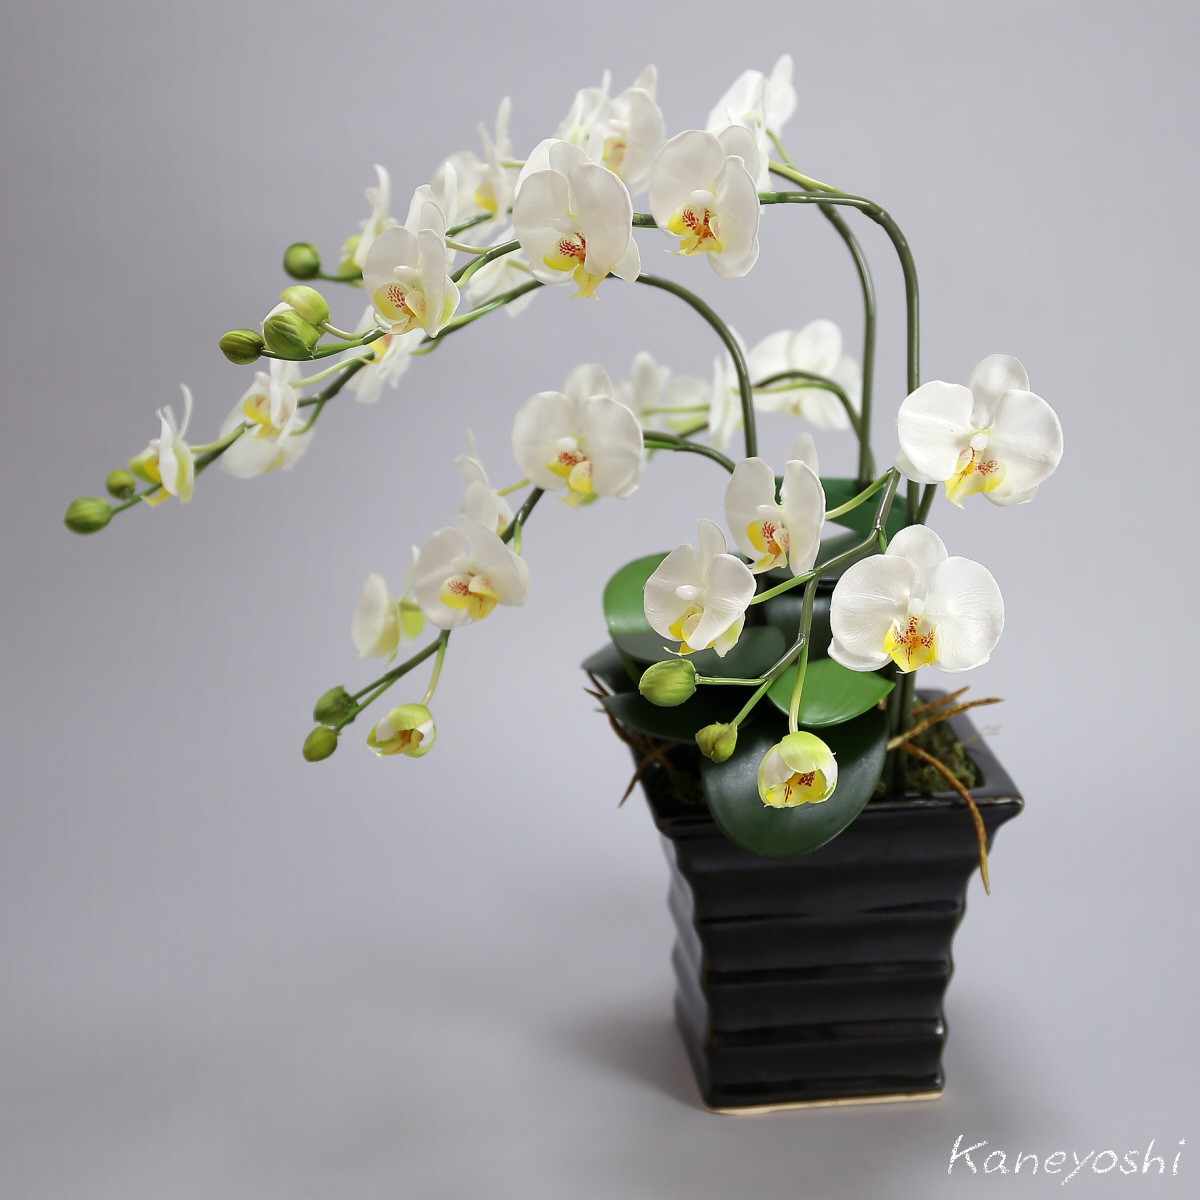  photocatalyst . butterfly orchid artificial flower interior small wheel 3ps.@. white B white color . festival gift souvenir birthday presentation new building opening flower fake green air cleaning 